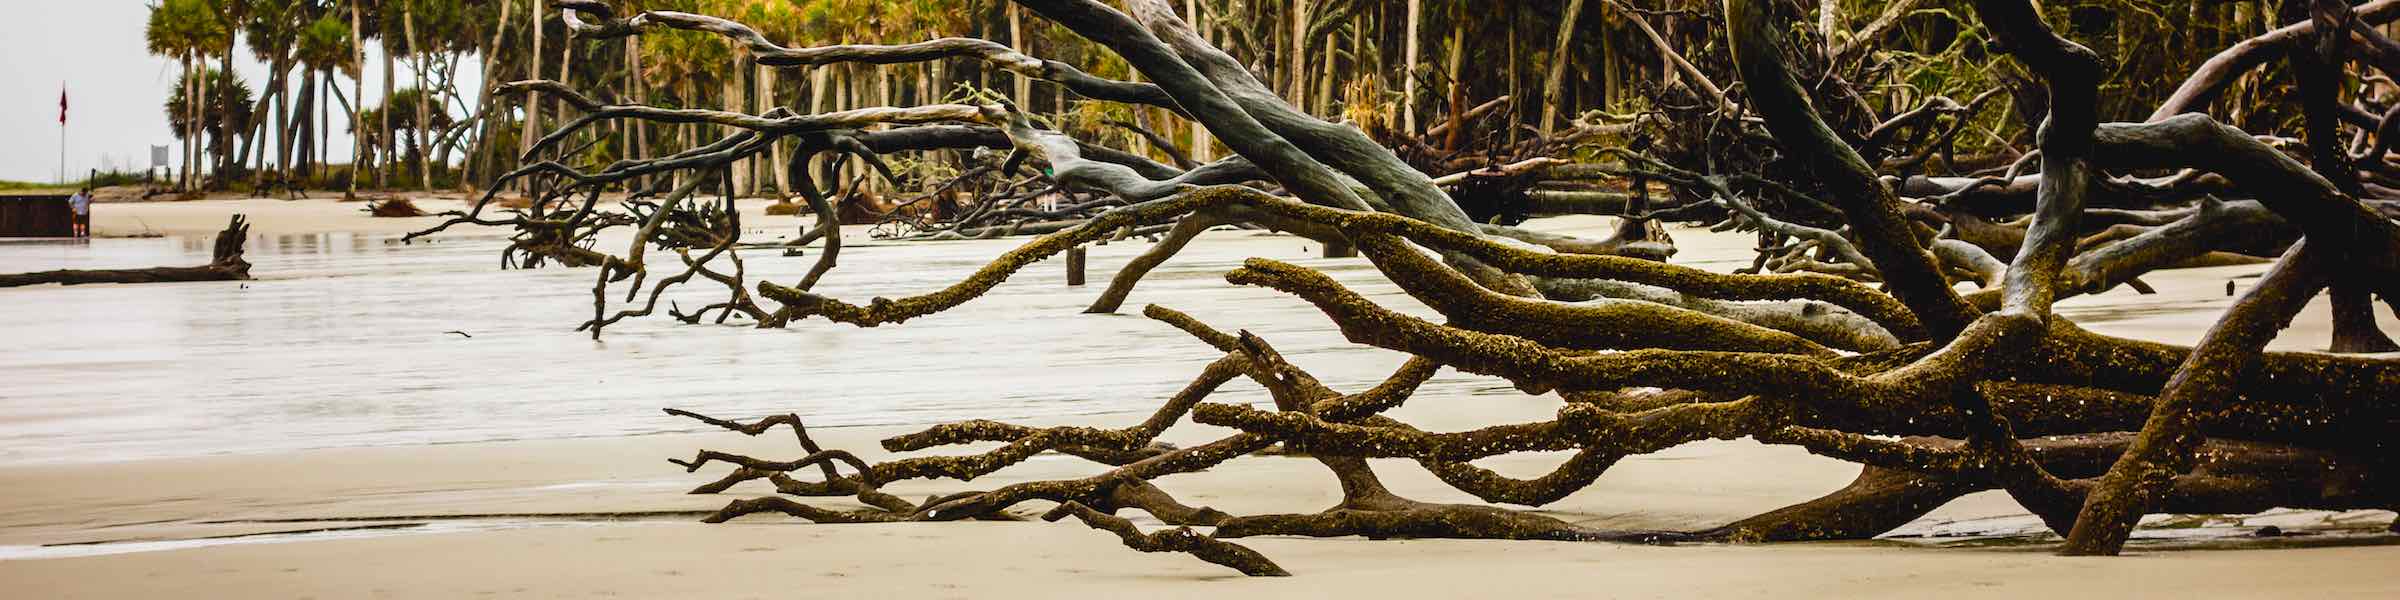 Driftwood on the beach at Hunting Island, SC.